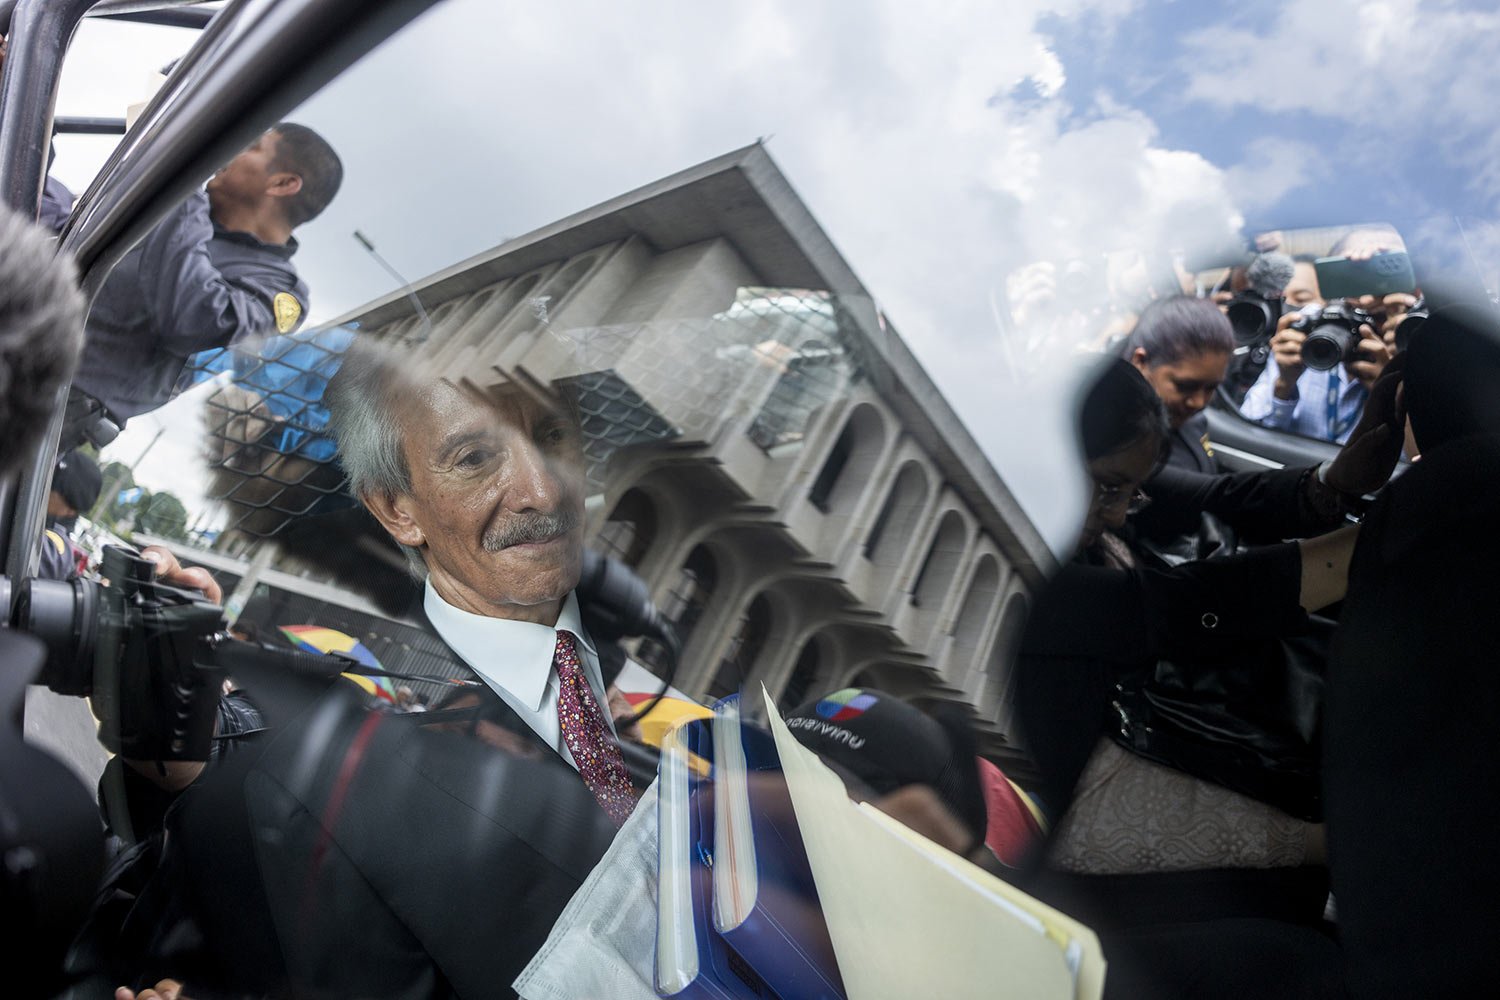  Newspaper founder and editor Jose Ruben Zamora rides in patrol car, surrounded by the press, back to prison after a court hearing in Guatemala City, Wednesday, June 14, 2023. A tribunal has convicted Zamora and sentenced him to six years in prison i